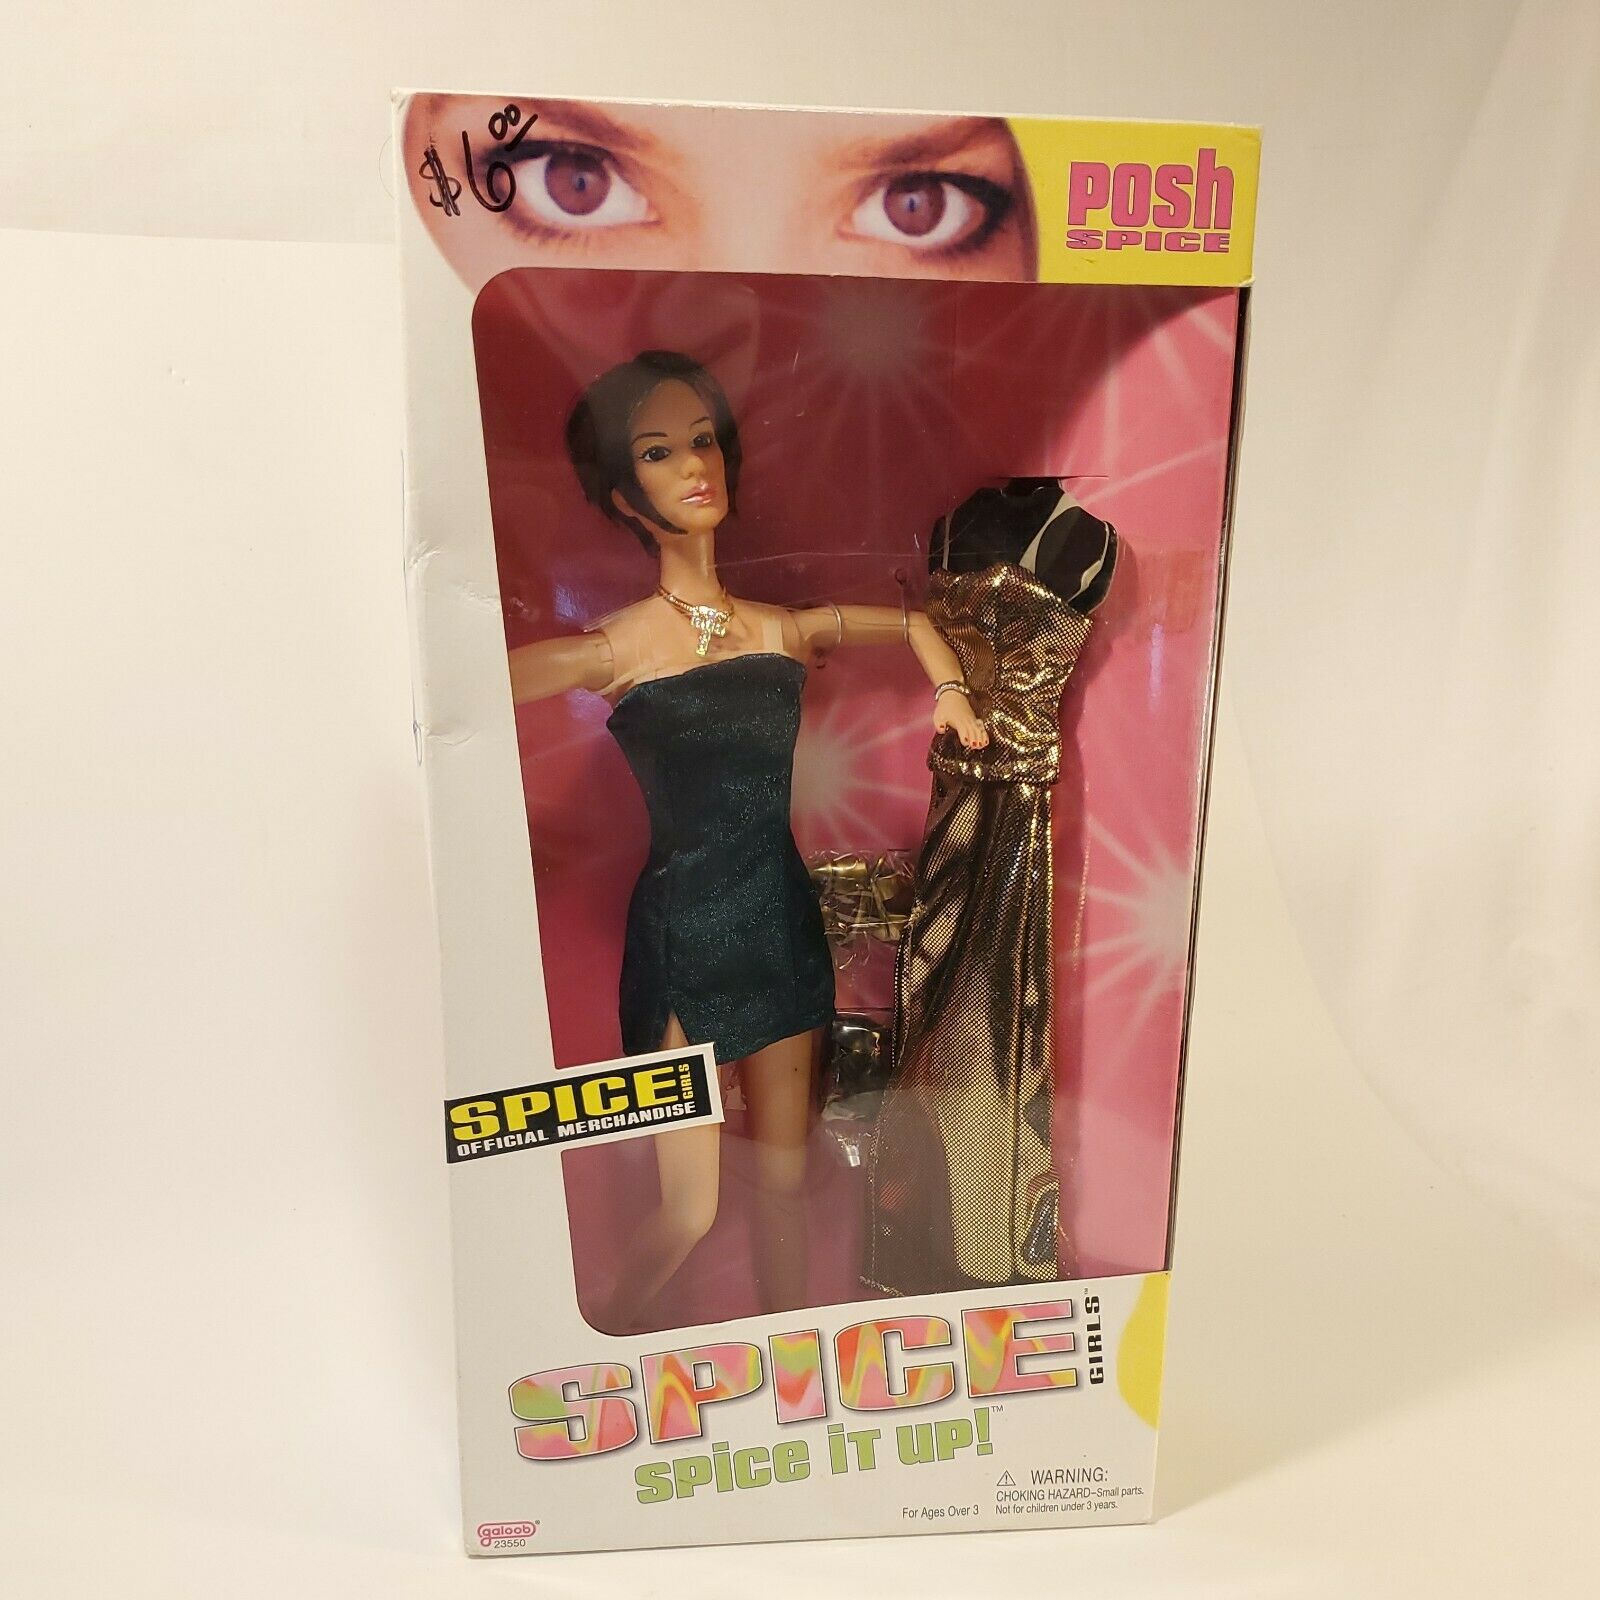 Spice Girls Doll Posh Spice It Up 1998 Galoob Sealed In Box New